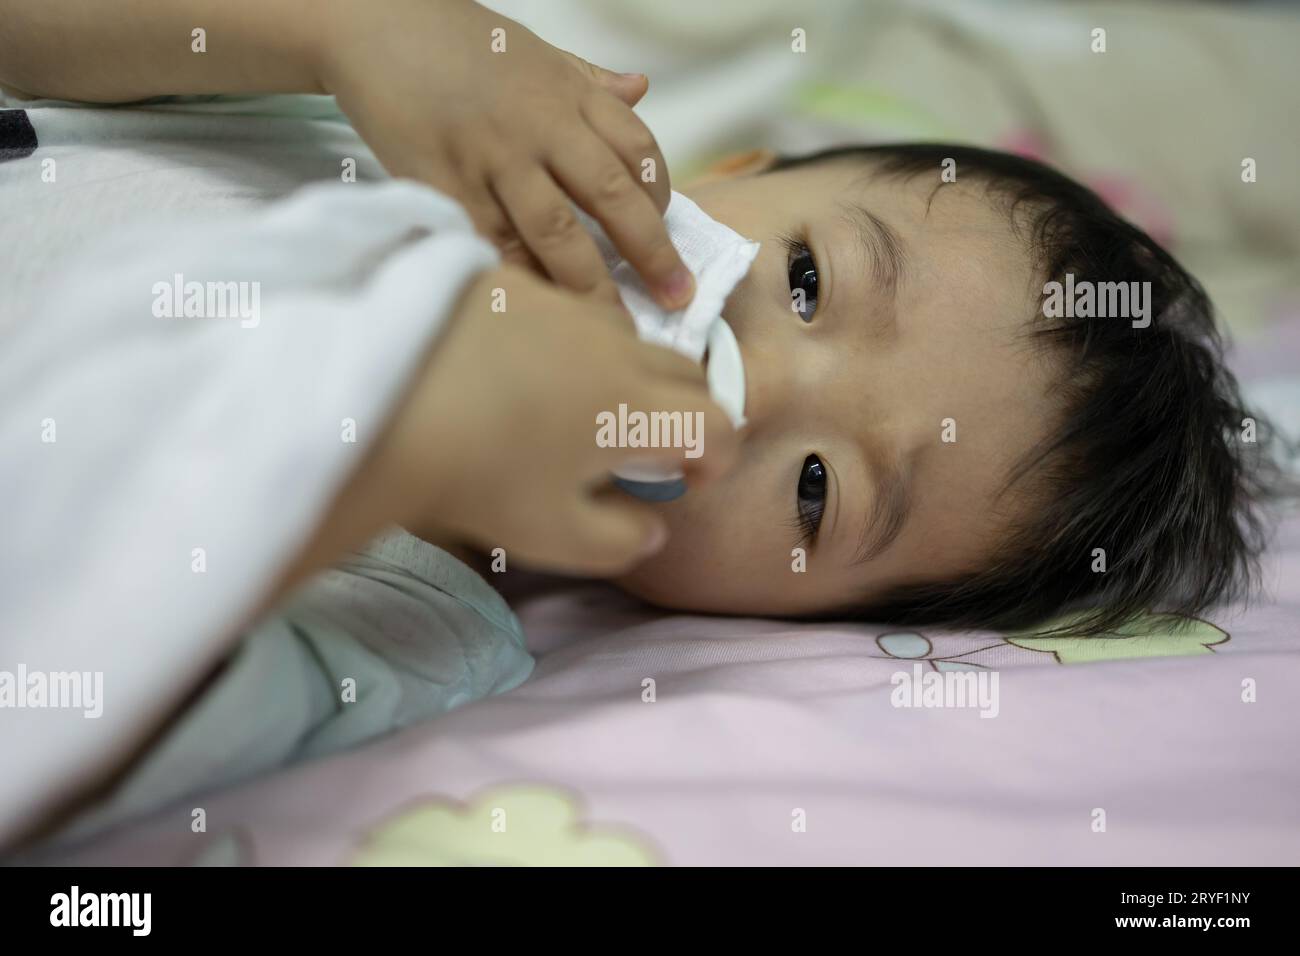 Portrait image of 1-2 years old child relaxing and chill while lying on bed Stock Photo